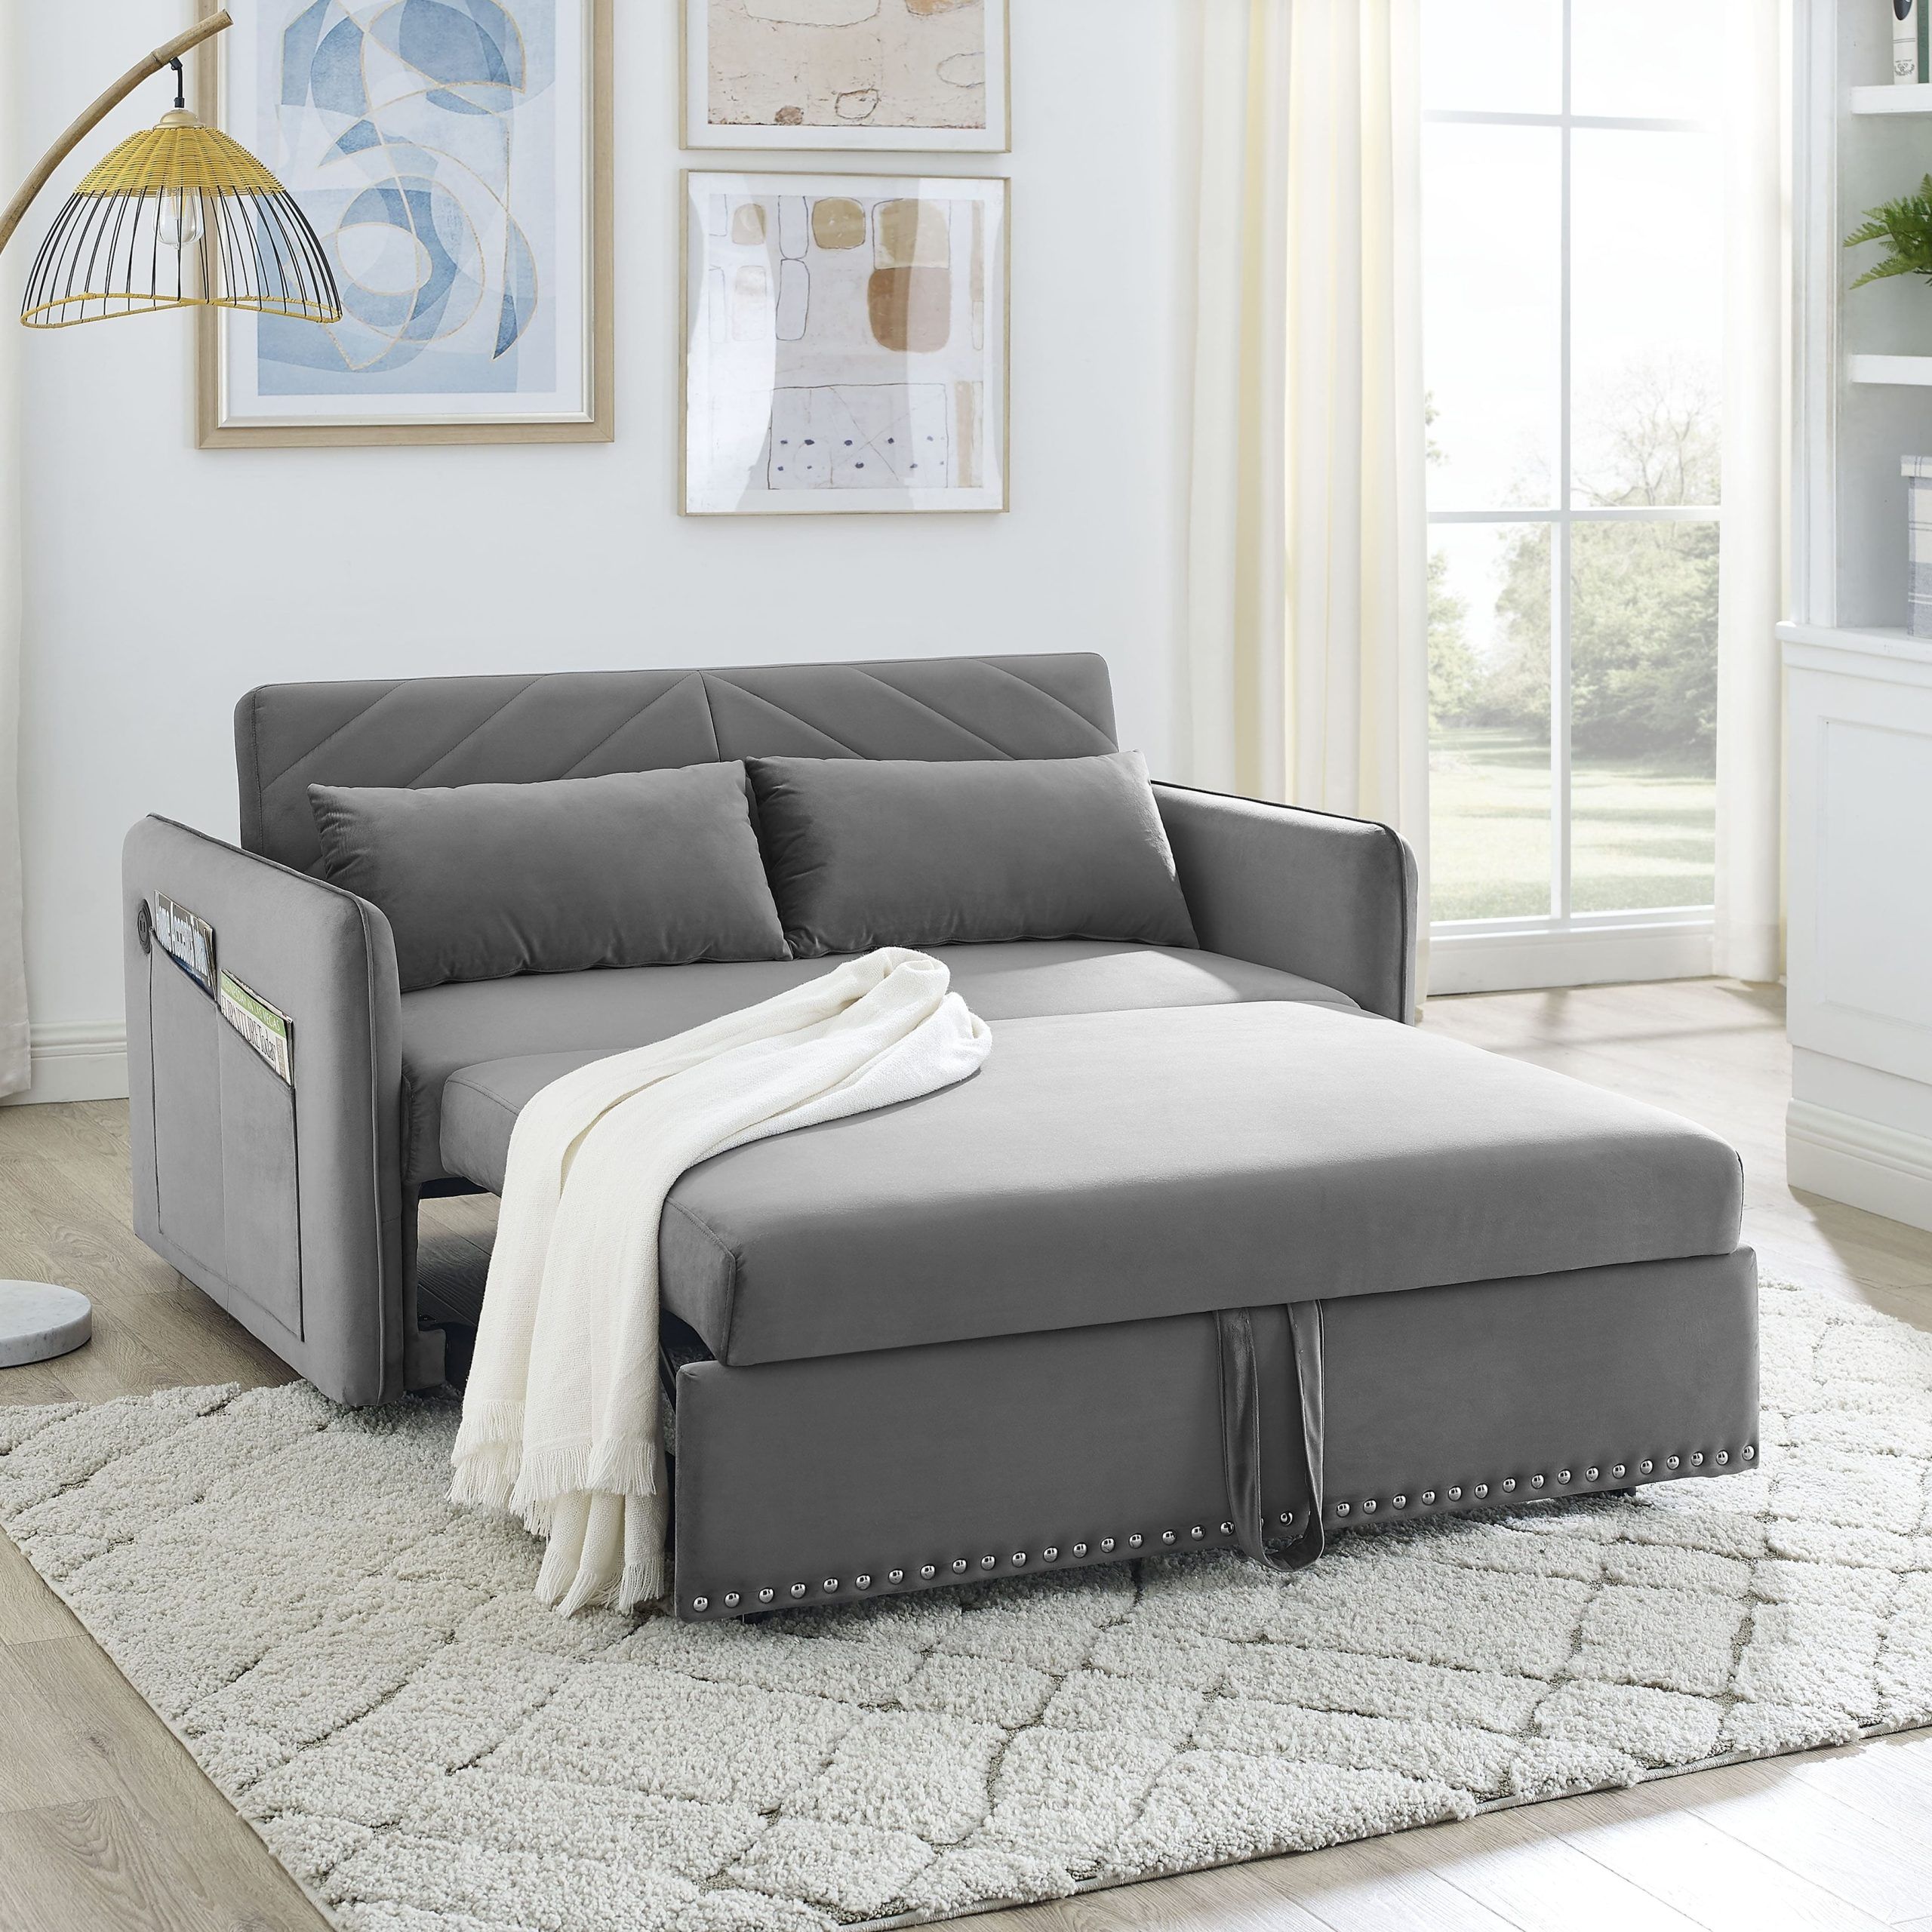 Velvet Pull Out Sleeper Sofa , 3 In 1 Adjustable Sleeper With Pull Out Bed,  2 Lumbar Pillows And Side Pocket – Bed Bath & Beyond – 38084240 Pertaining To 3 In 1 Gray Pull Out Sleeper Sofas (View 2 of 15)